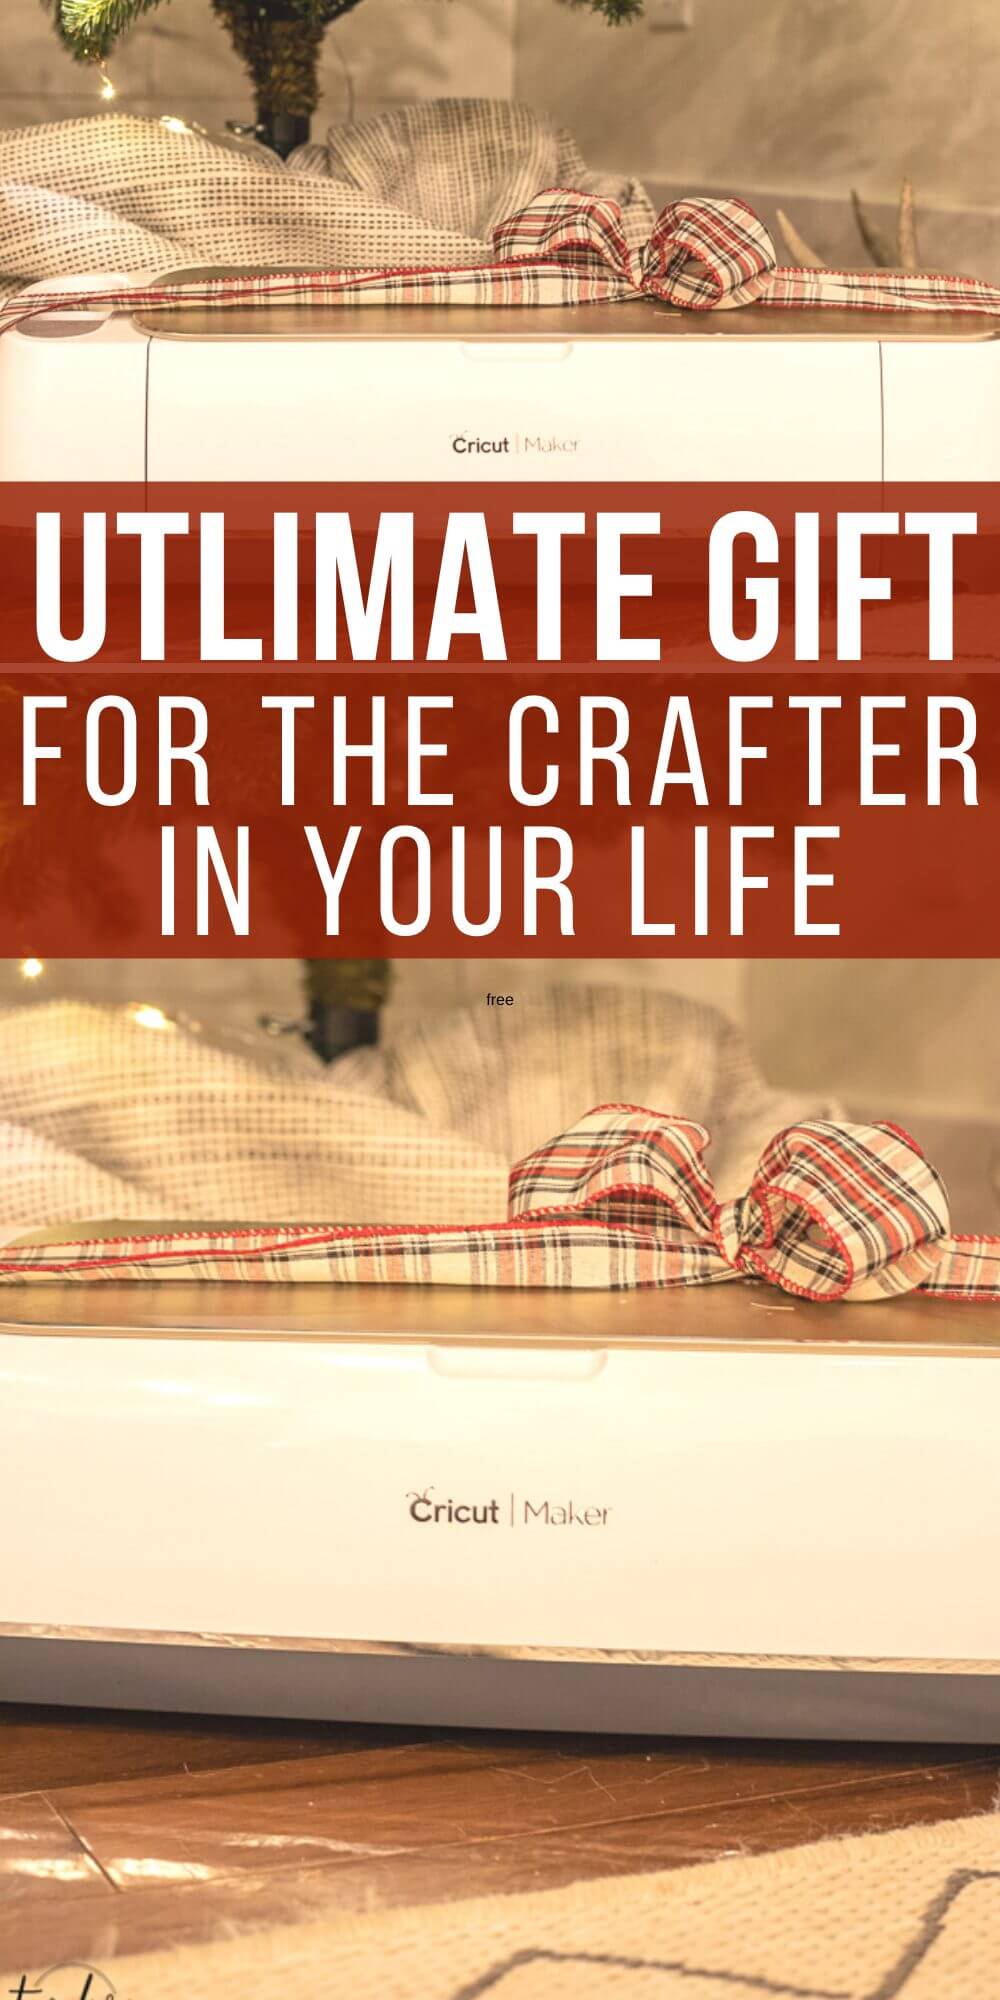 Get the perfect holiday gift for the crafter or DIYer in your life. This is the ultimate gift for someone who loves to create!